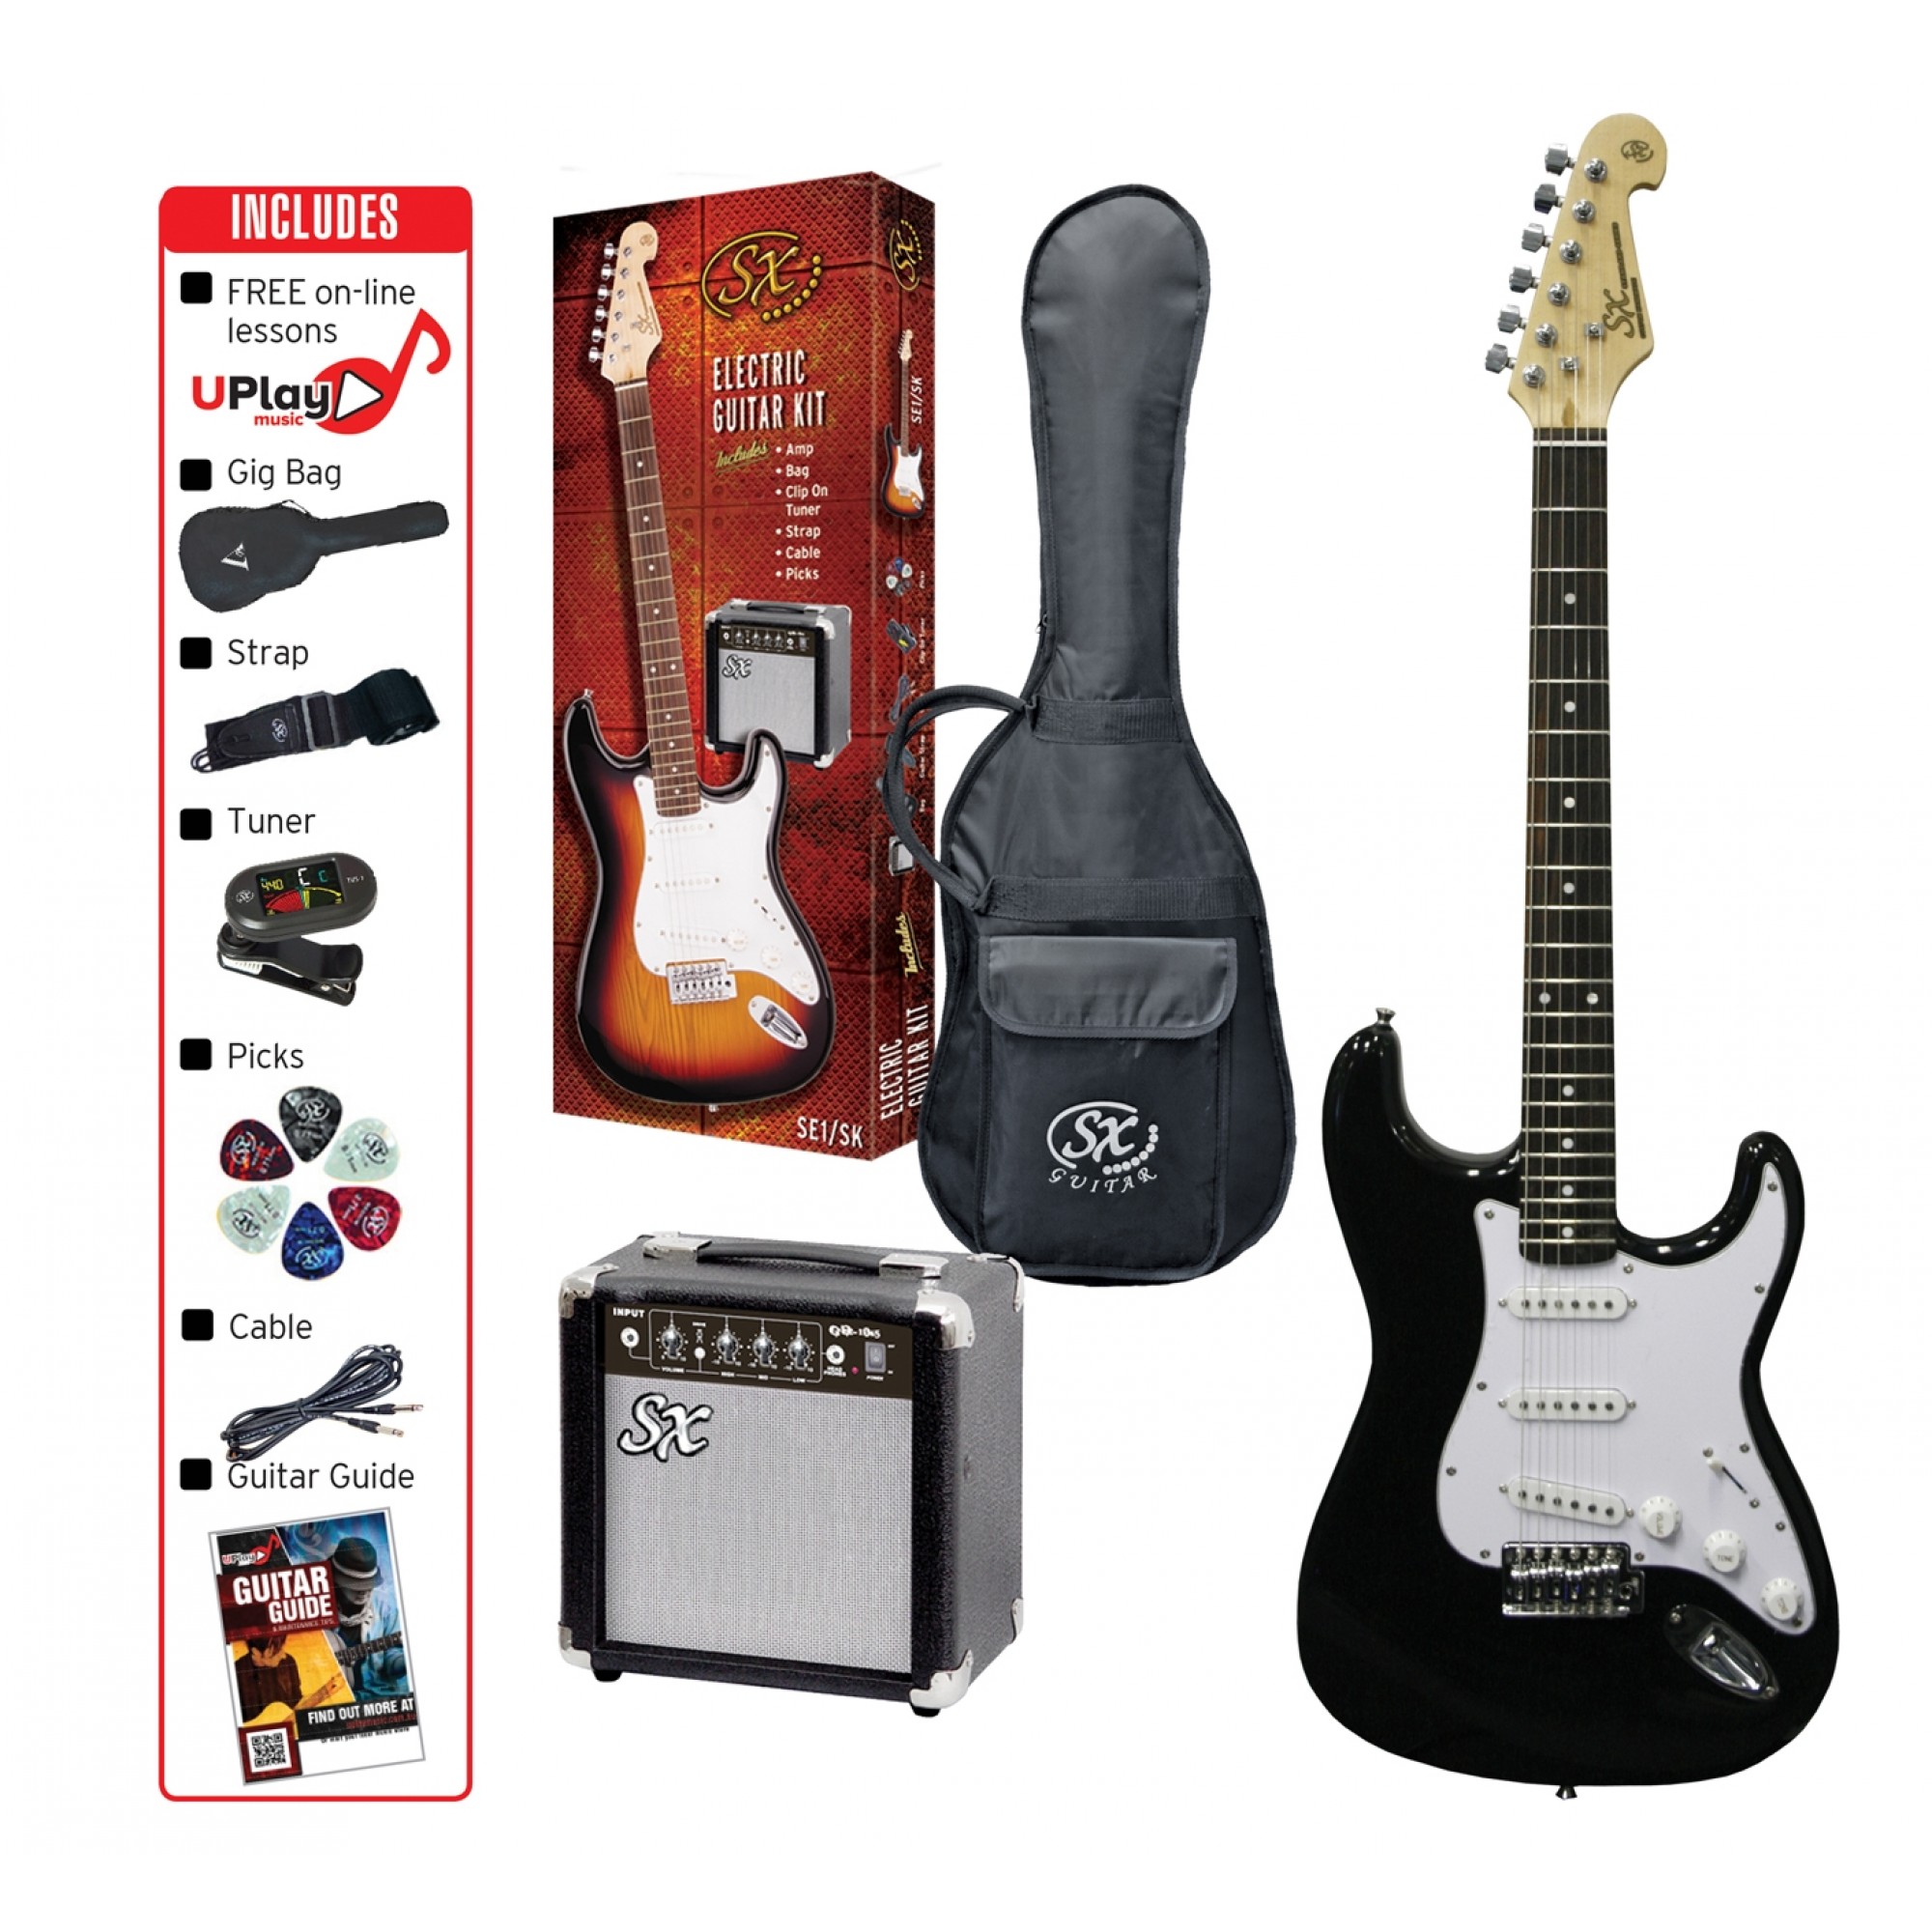 Lightning Style Electric Guitar for Beginner Complete Kit with Power Cord/Strap/Bag/Plectrums Black & White White Affordable & Great Electric Guitars for Starter